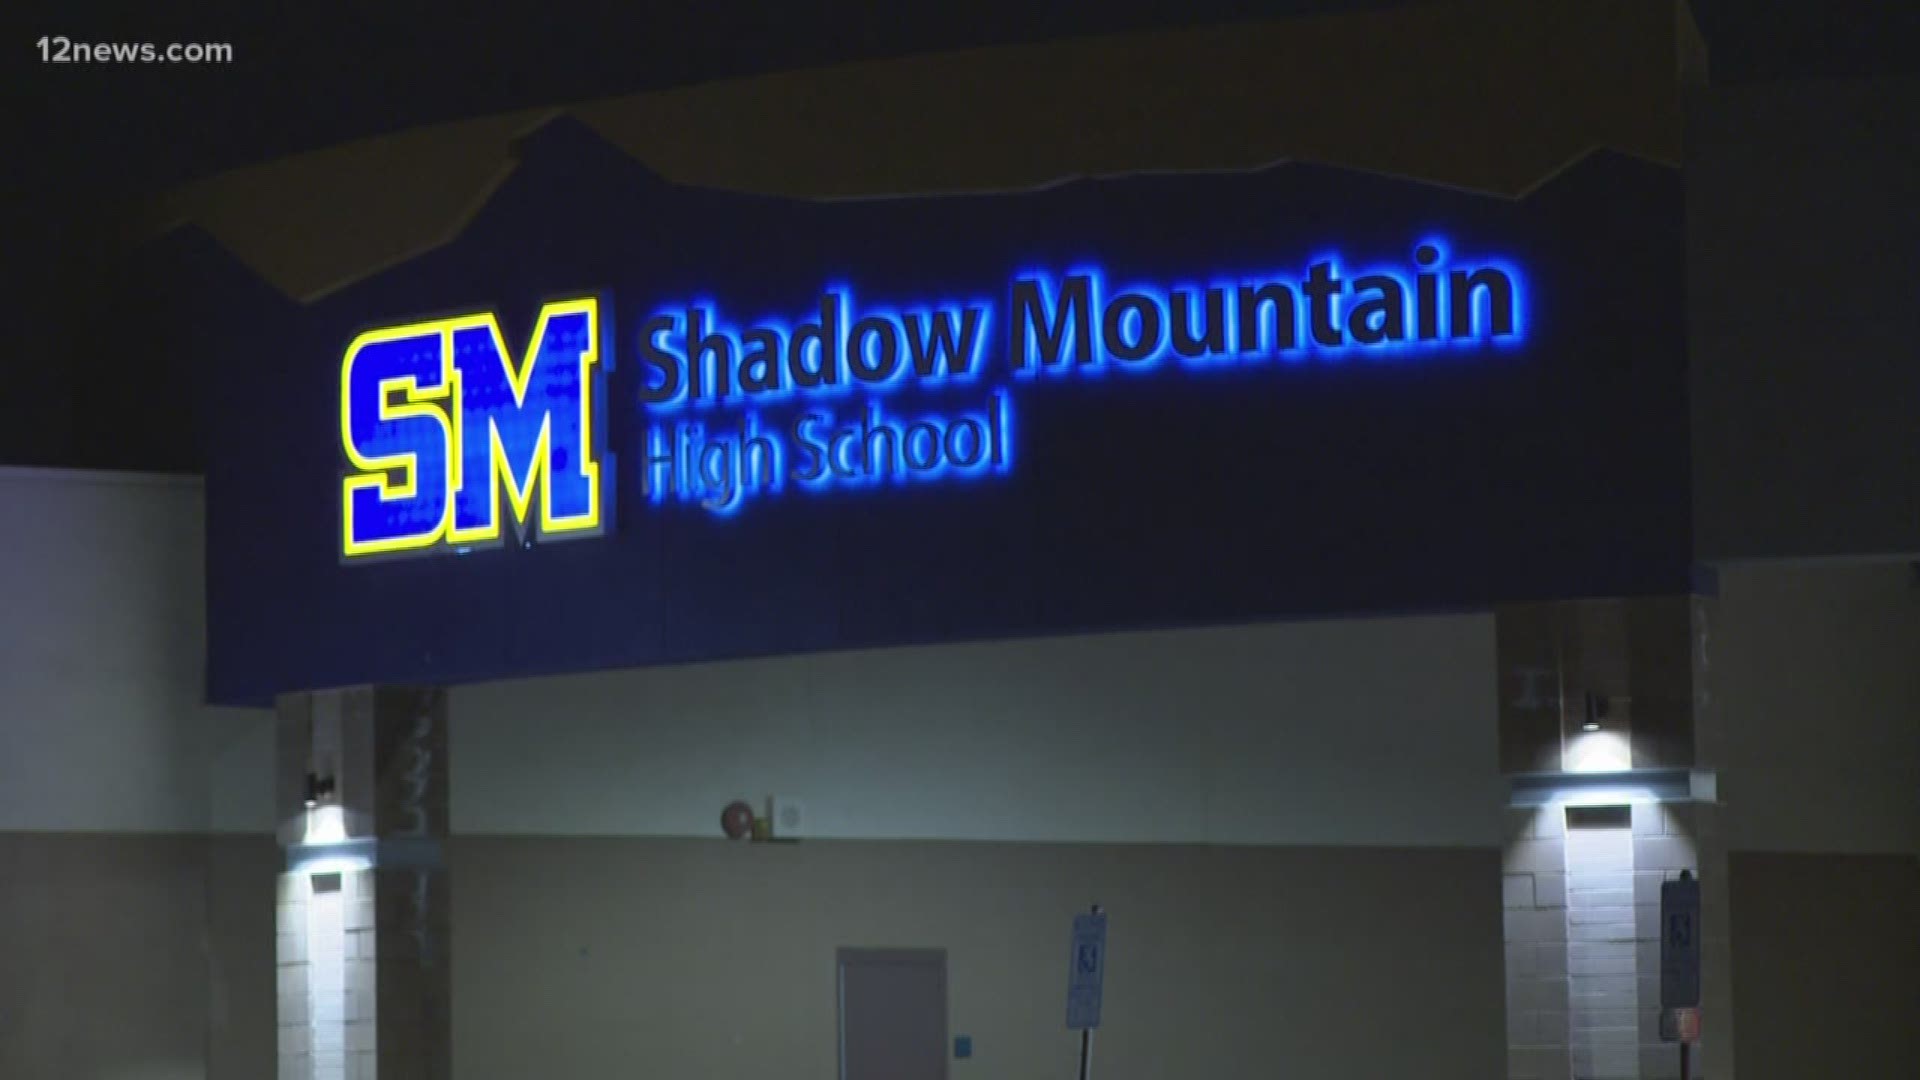 The lawyer representing the teacher claiming former NBA player and Shadow Mountain basketball coach groped and rubbed his genitals on her says the school knew about the allegations for years.